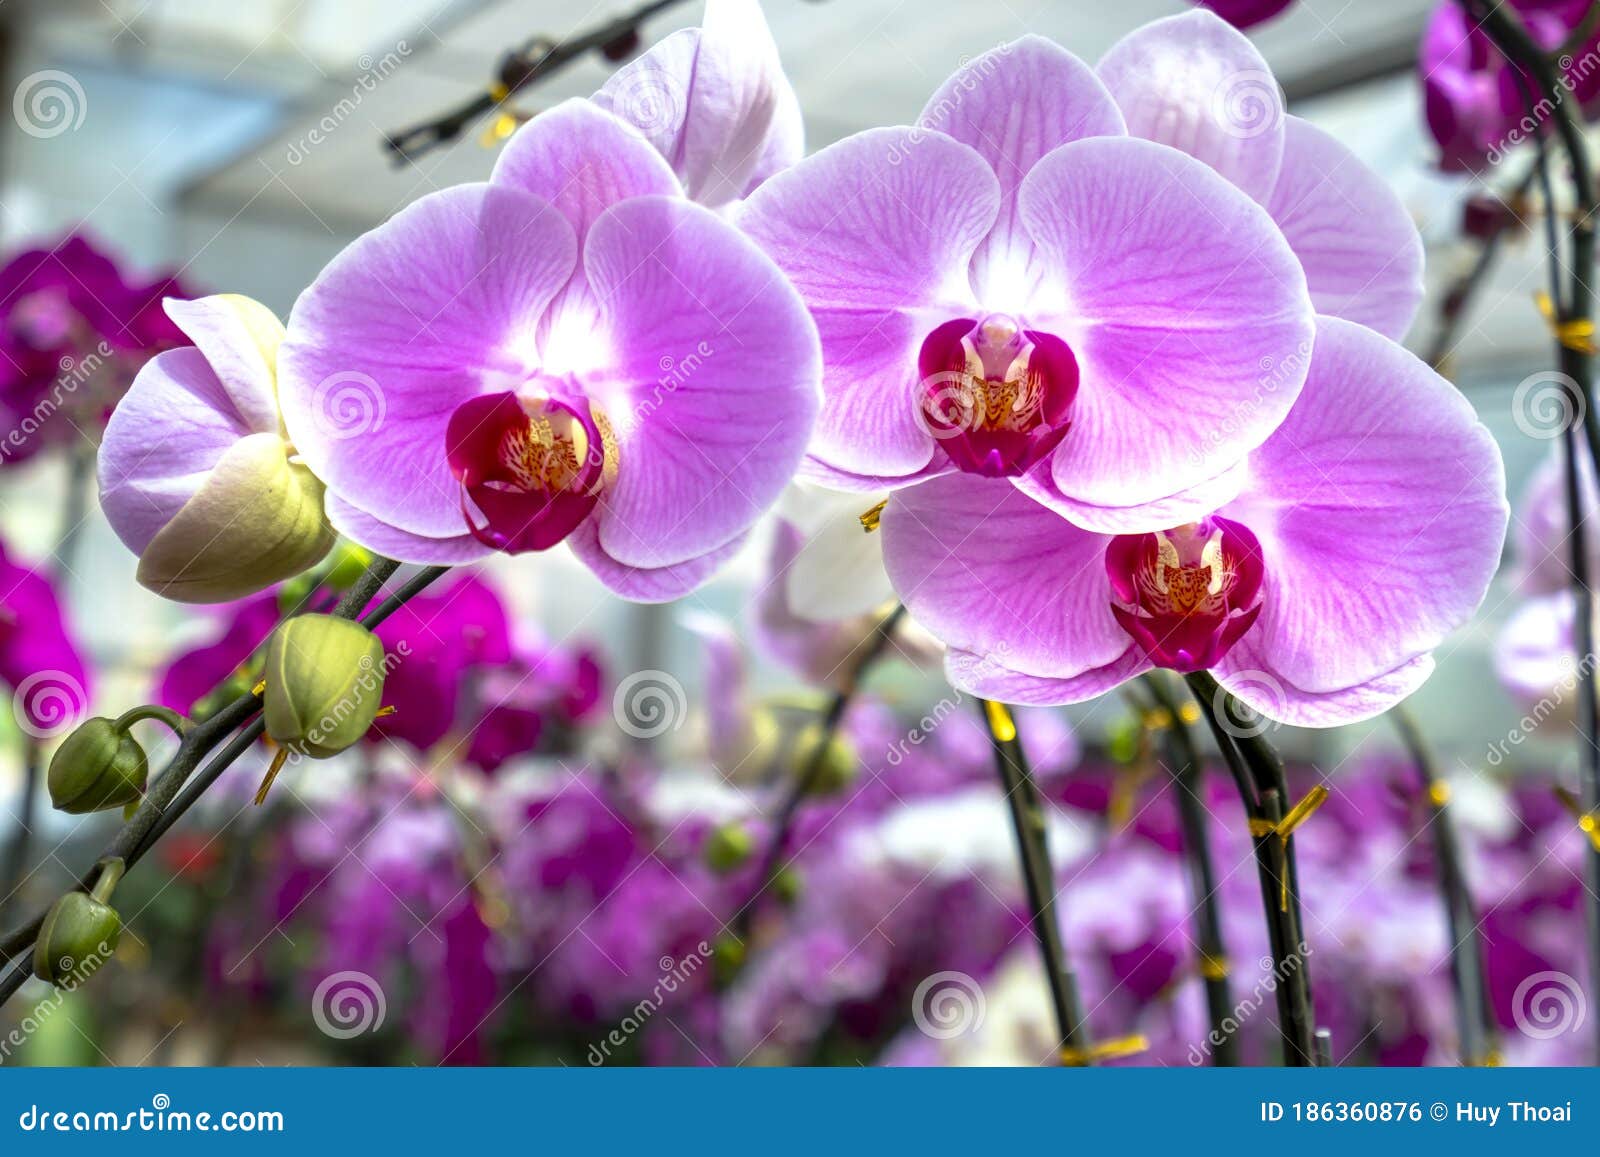 Phalaenopsis Orchids Bloom In A Variety Of Colors In The Garden Stock Photo Image Of Flower Celebration 186360876